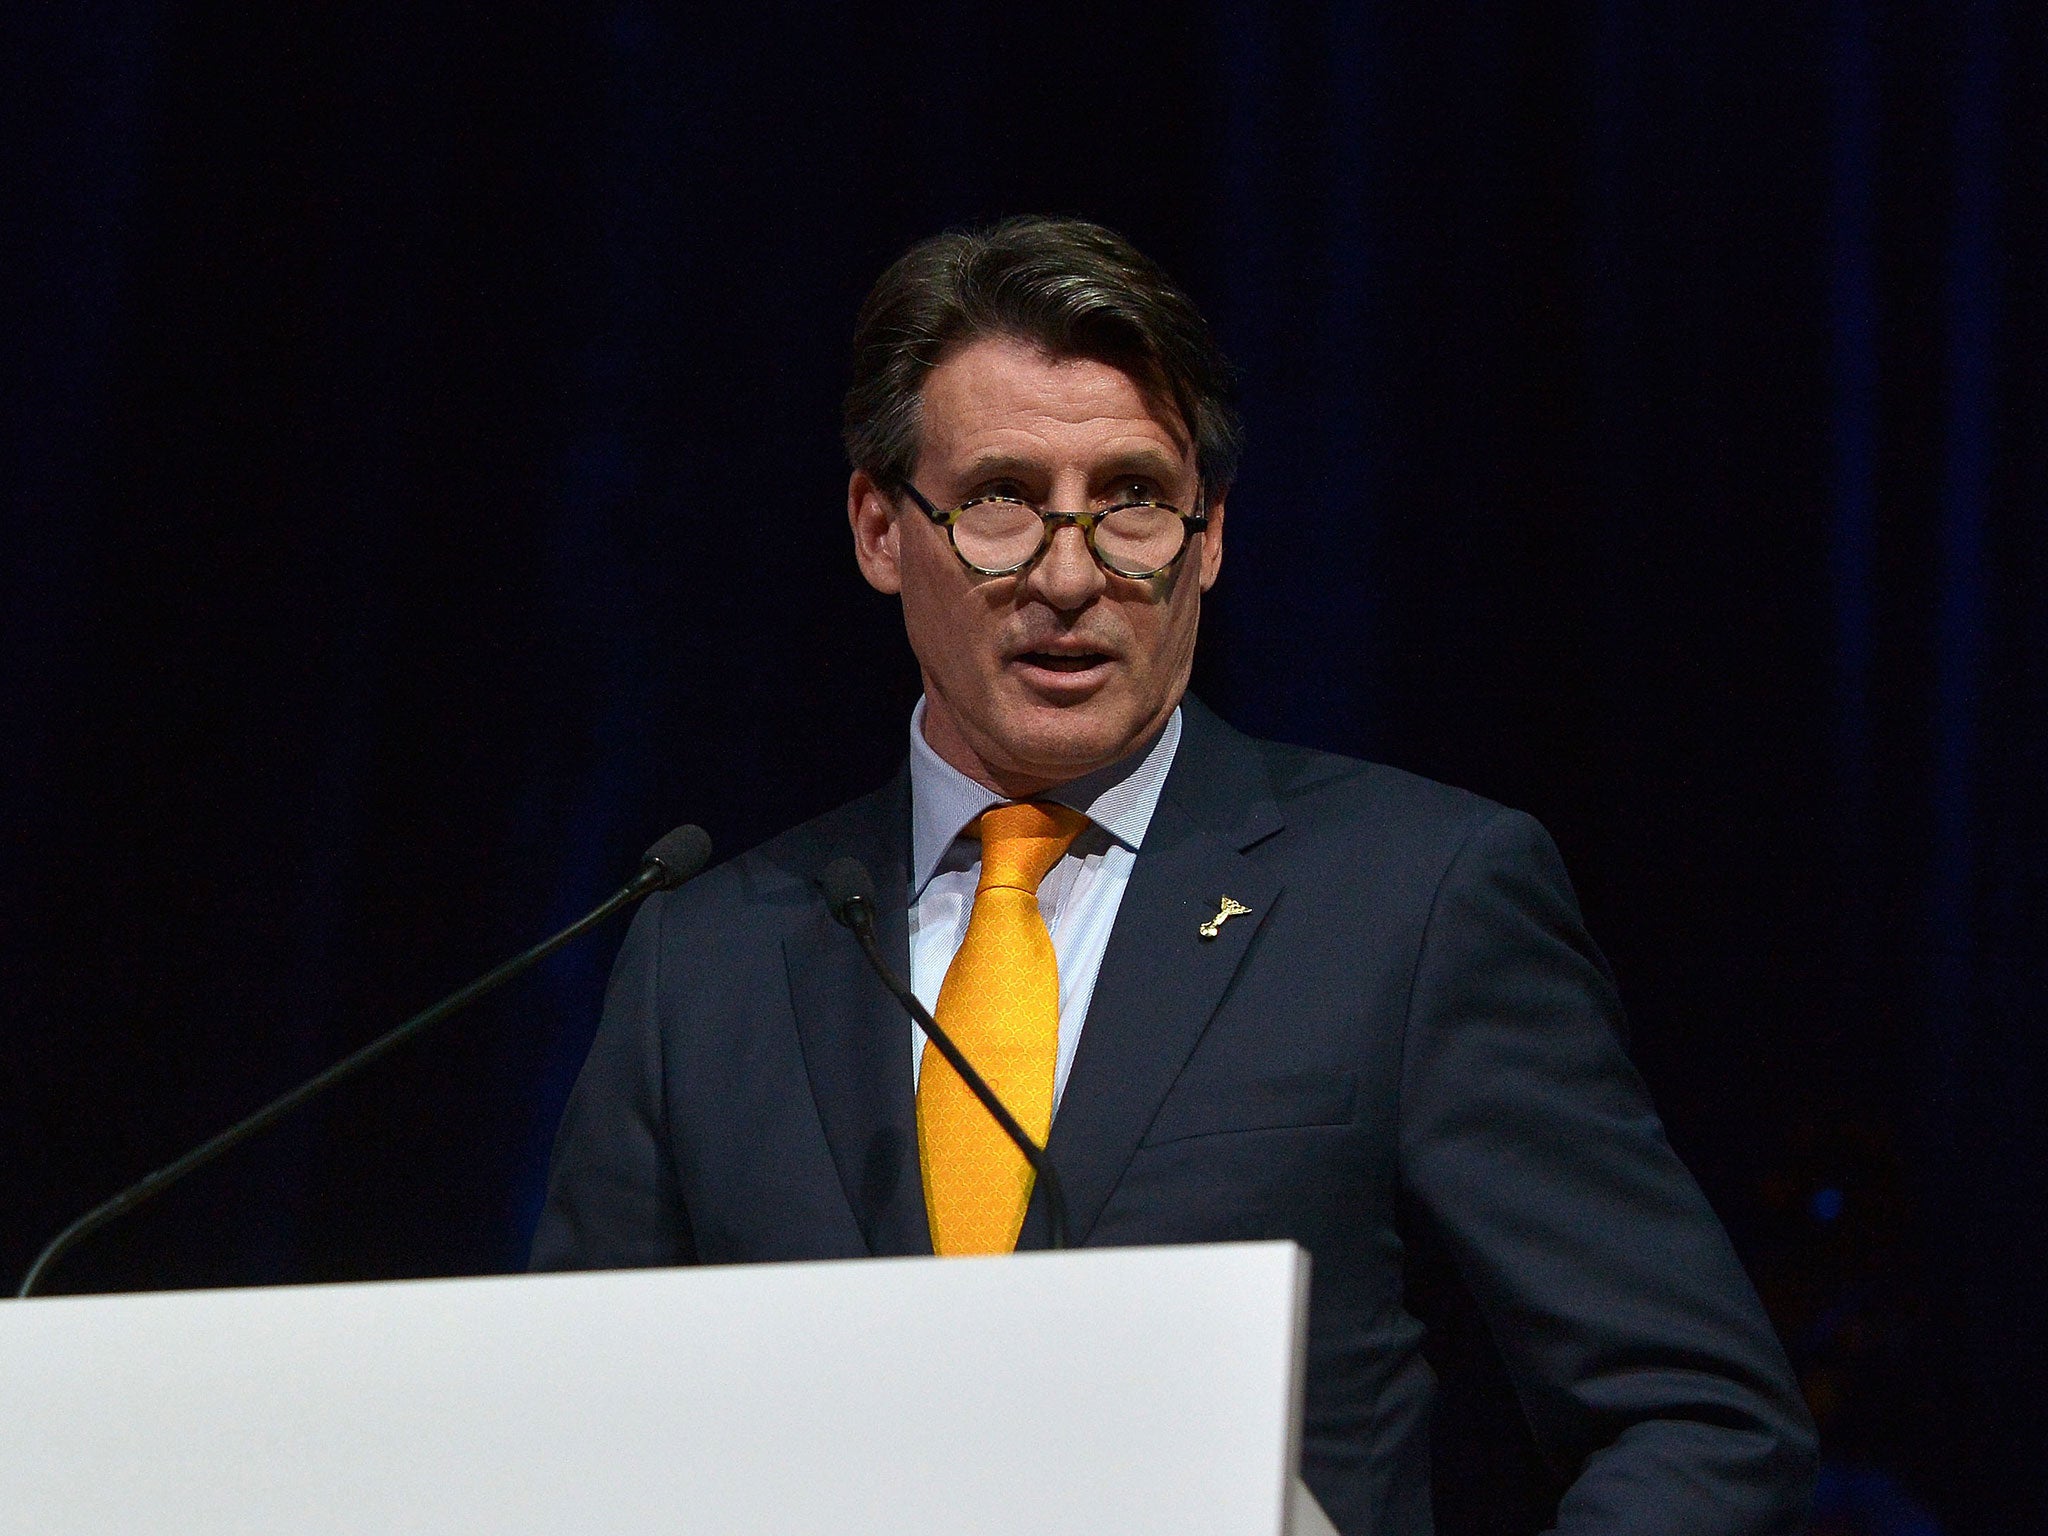 IAAF president Seb Coe has given Russia one week to respond